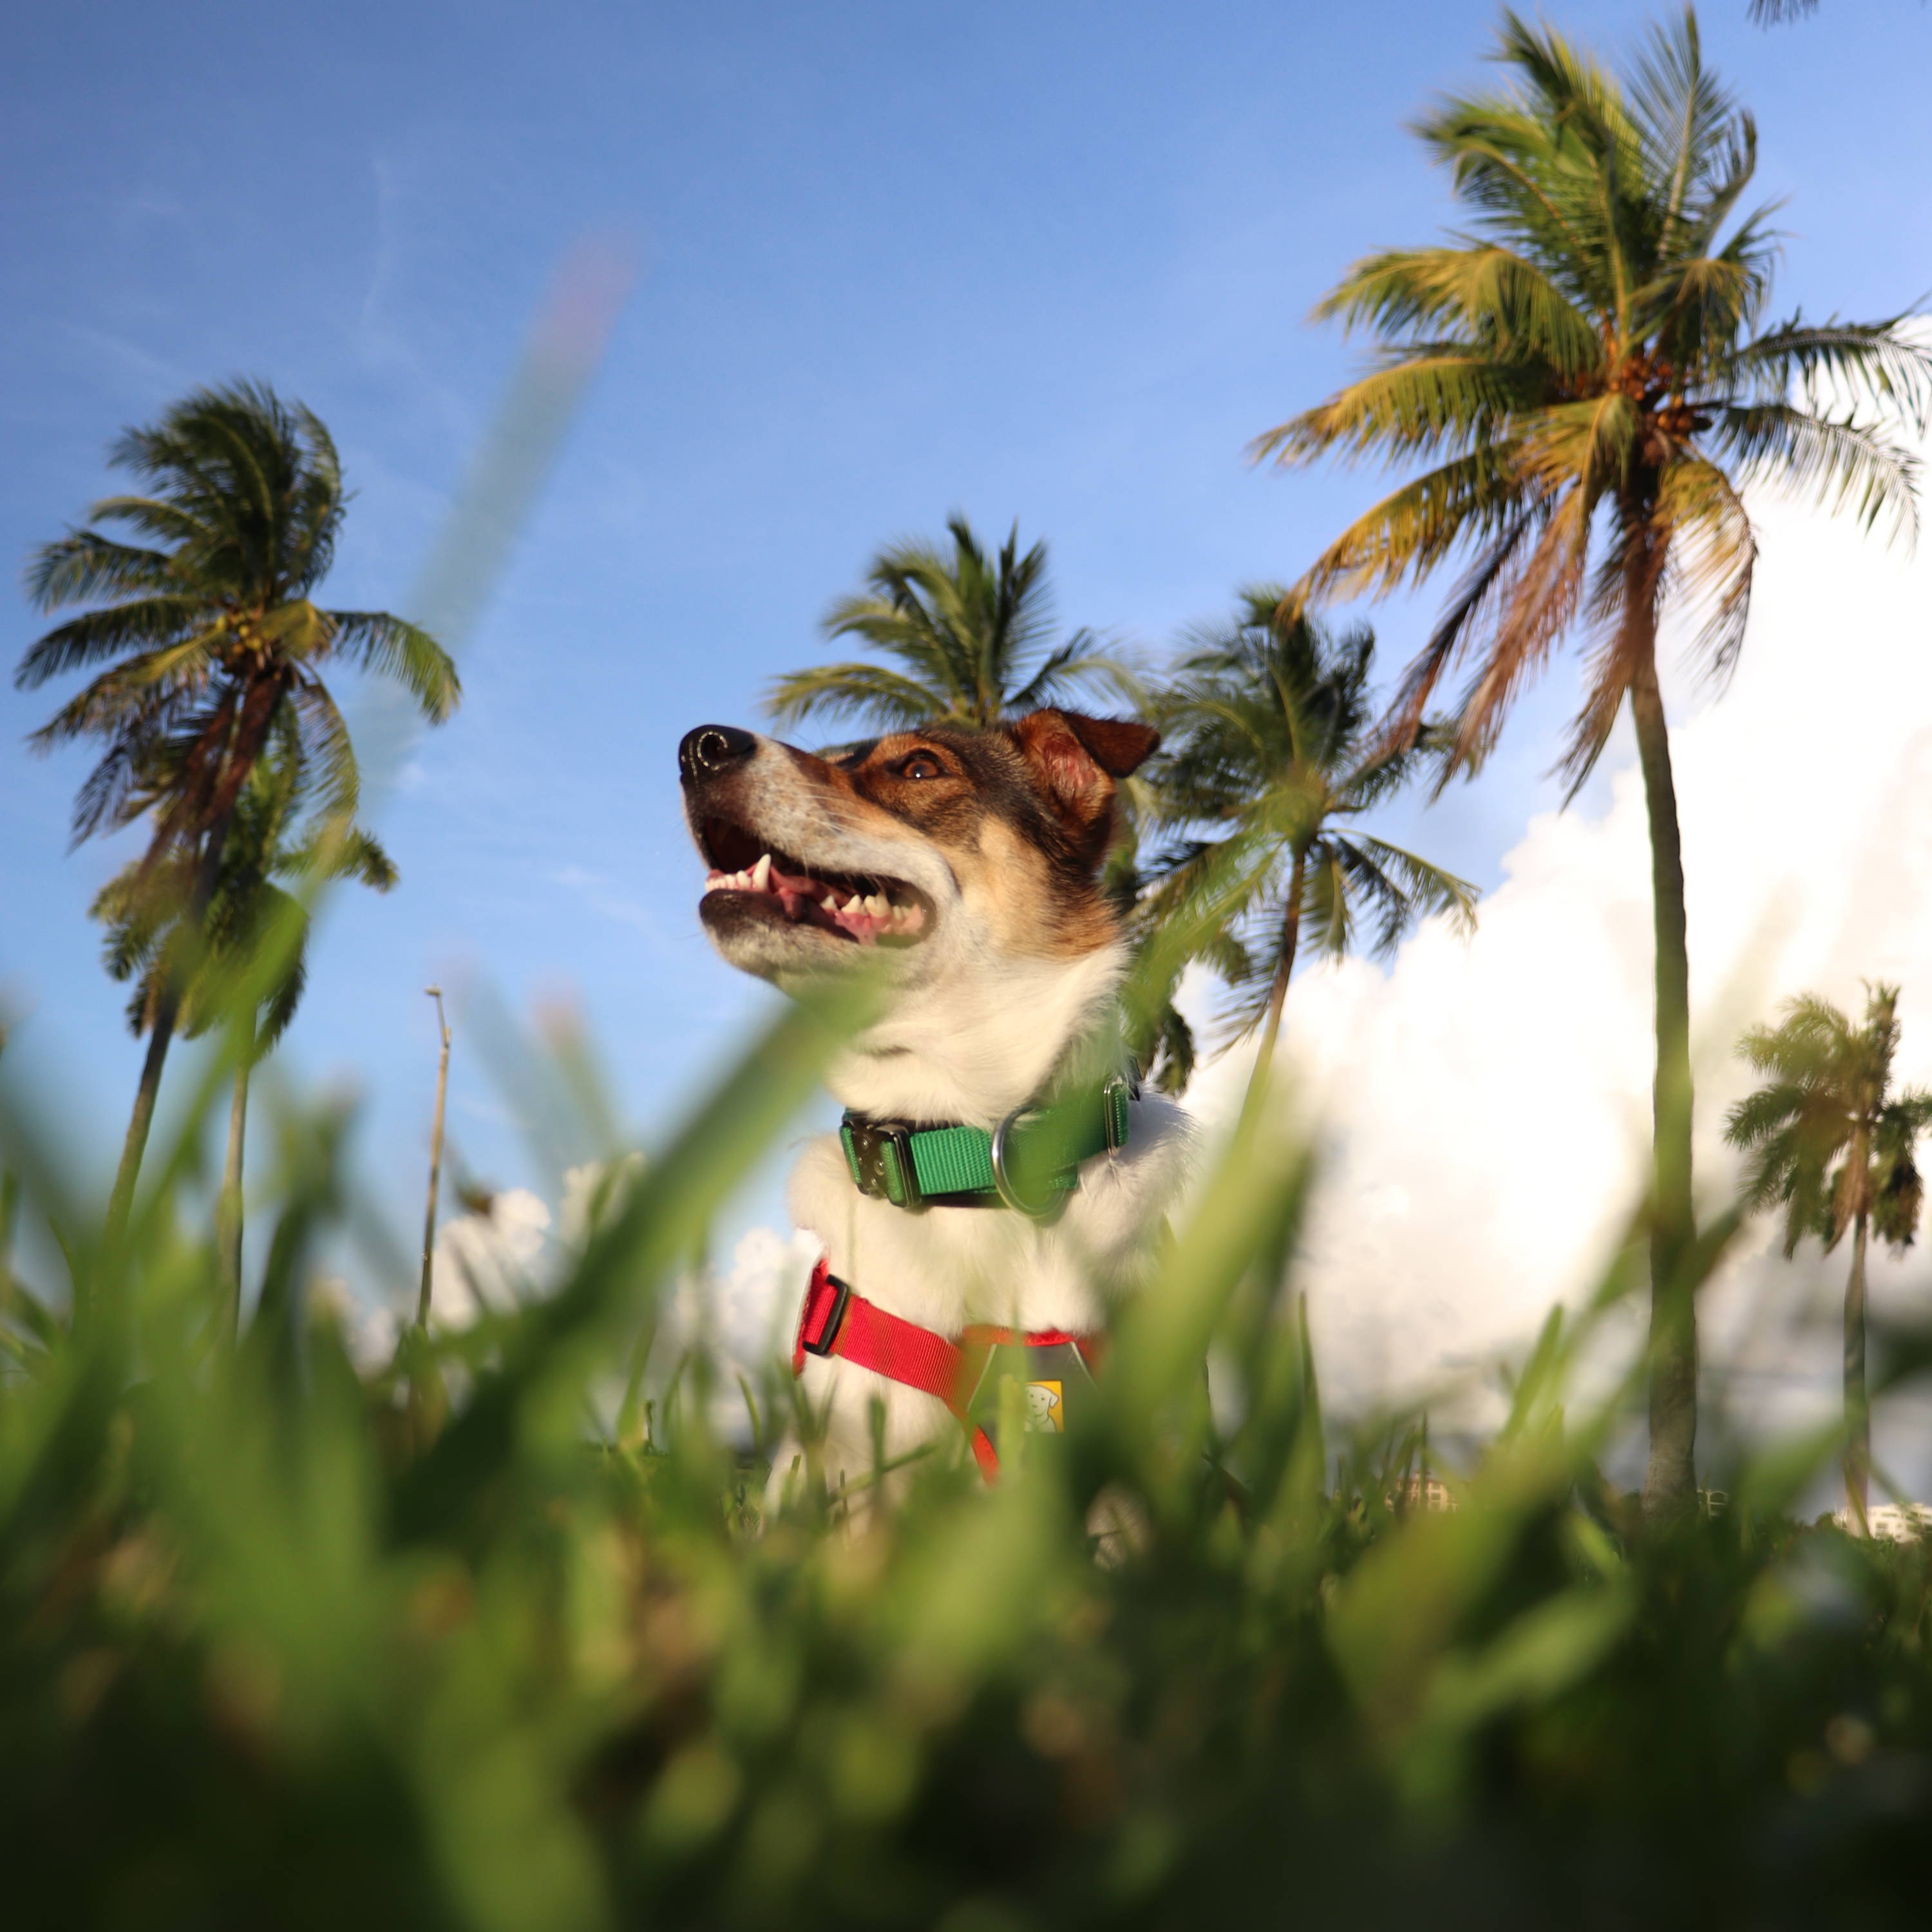 Dog smiling with palm trees and blue sky in the background.